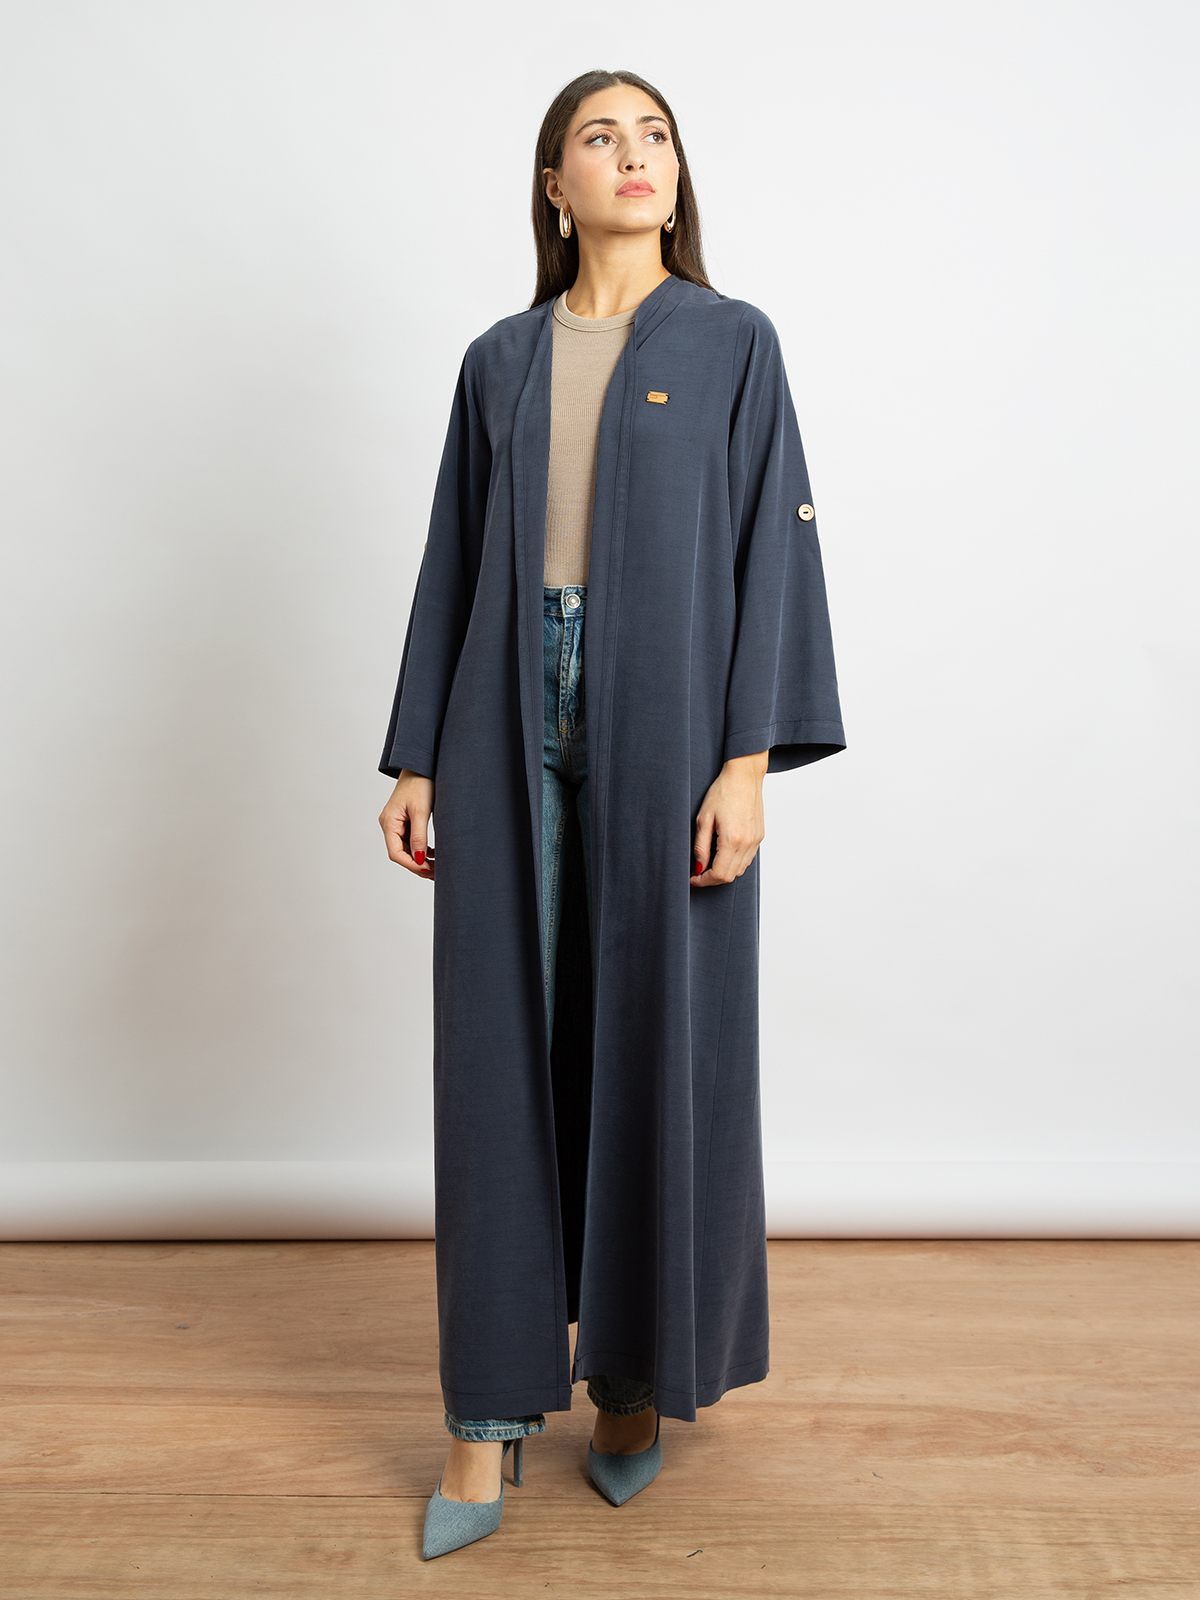 Washed linen long open regular fit abaya in pale navy color with adjustable sleeves from kaafmeem for work and everyday wear 